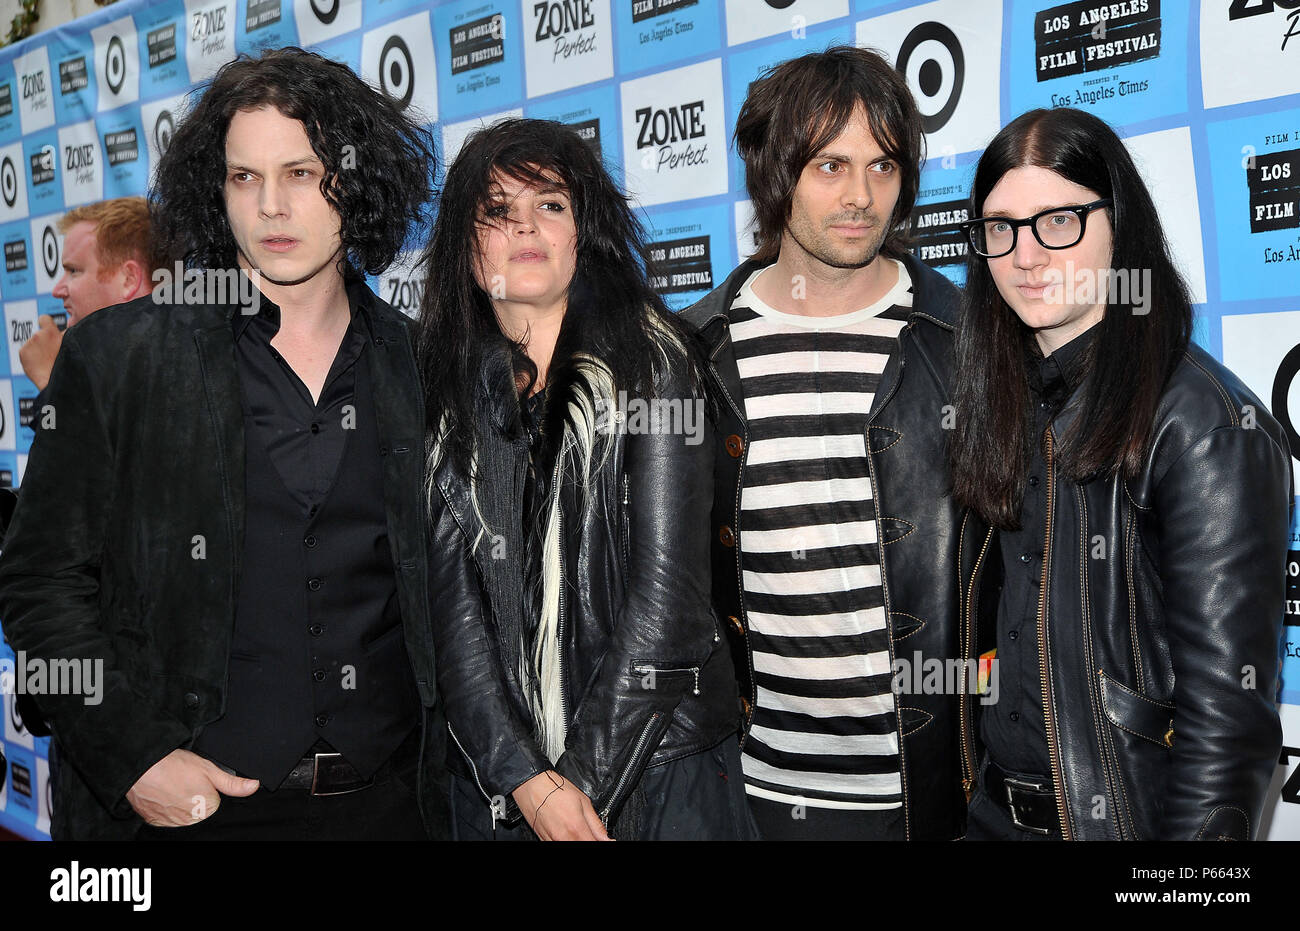 Jack White, Alison Mosshart ( of The Kills ), Dean Fertita ( of the Queens of Stone Age ), Jack lawrence ( of the Raconteurs )- It May Get loud Premiere at the LA Film Festival at the Man Festival Theatre In Los Angeles.          -            TheDeadWeather 23.jpgTheDeadWeather 23  Event in Hollywood Life - California, Red Carpet Event, USA, Film Industry, Celebrities, Photography, Bestof, Arts Culture and Entertainment, Topix Celebrities fashion, Best of, Hollywood Life, Event in Hollywood Life - California, Red Carpet and backstage, ,Arts Culture and Entertainment, Photography,    inquiry ts Stock Photo